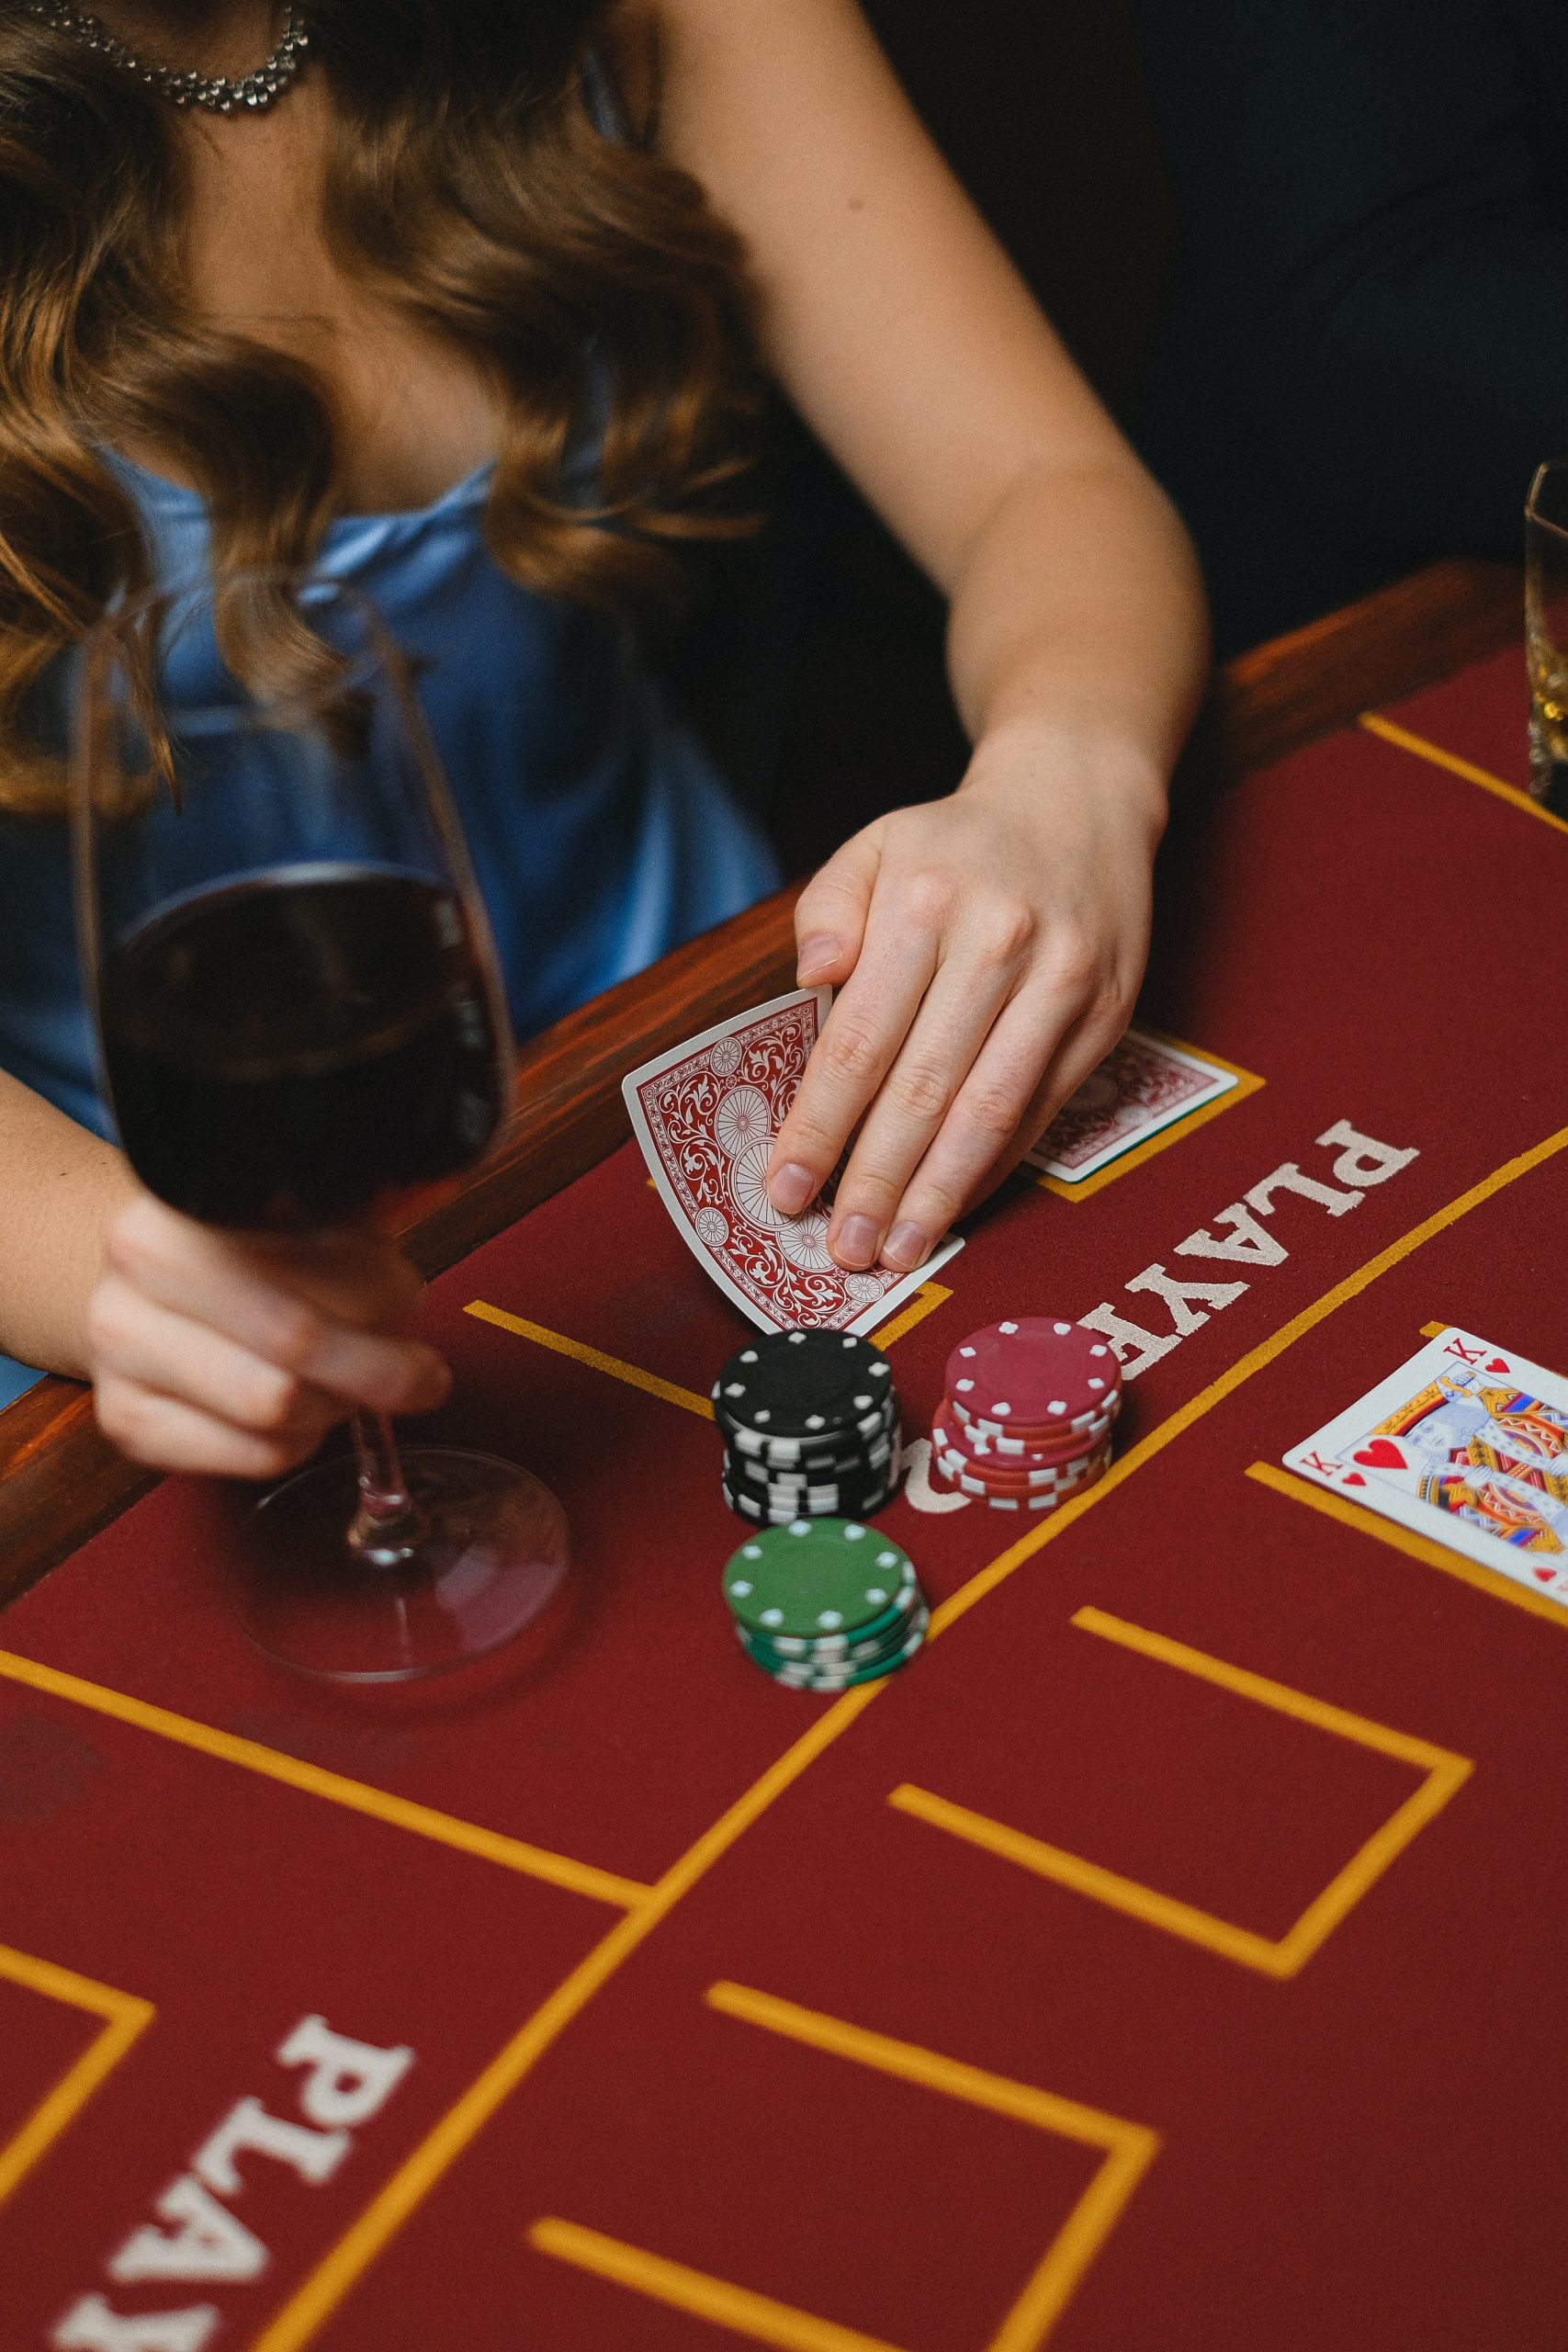 woman in the act of peeking at her cards while holding a glass of wine, cards and chips on casino table